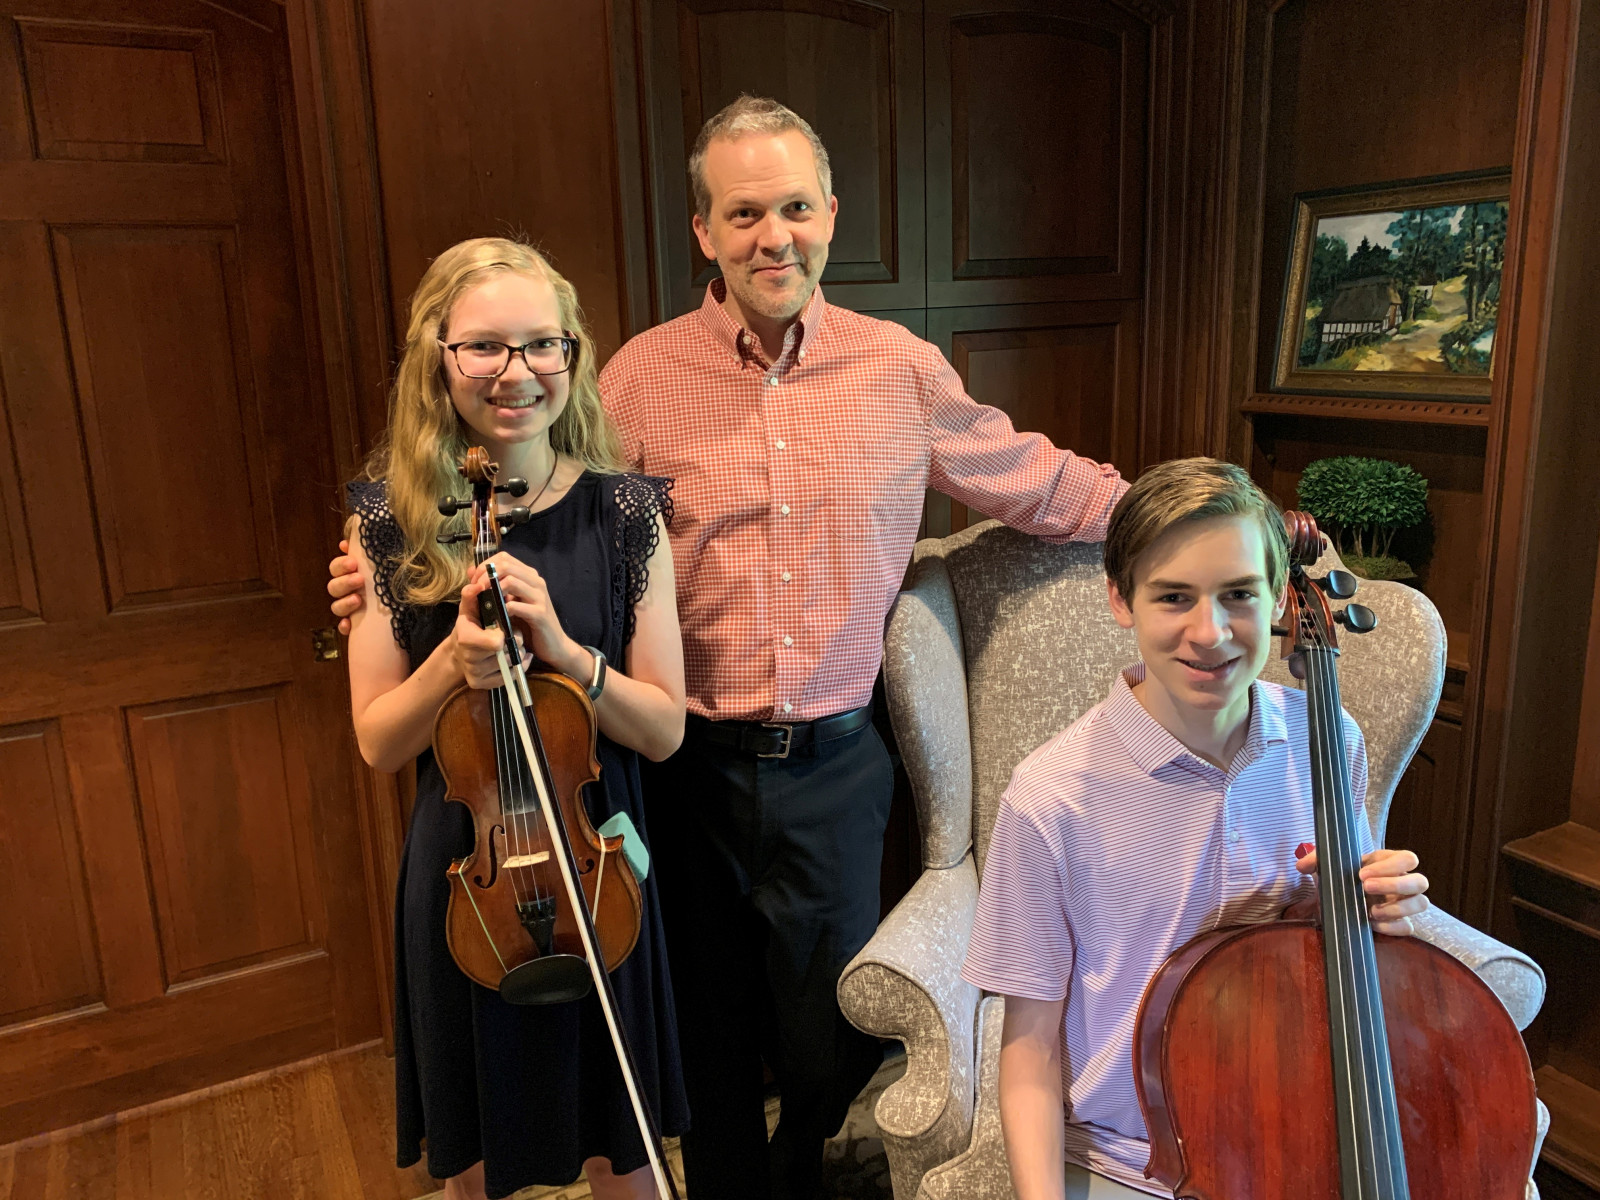 Dr. Heath Turner and children with instruments in a wood paneled room